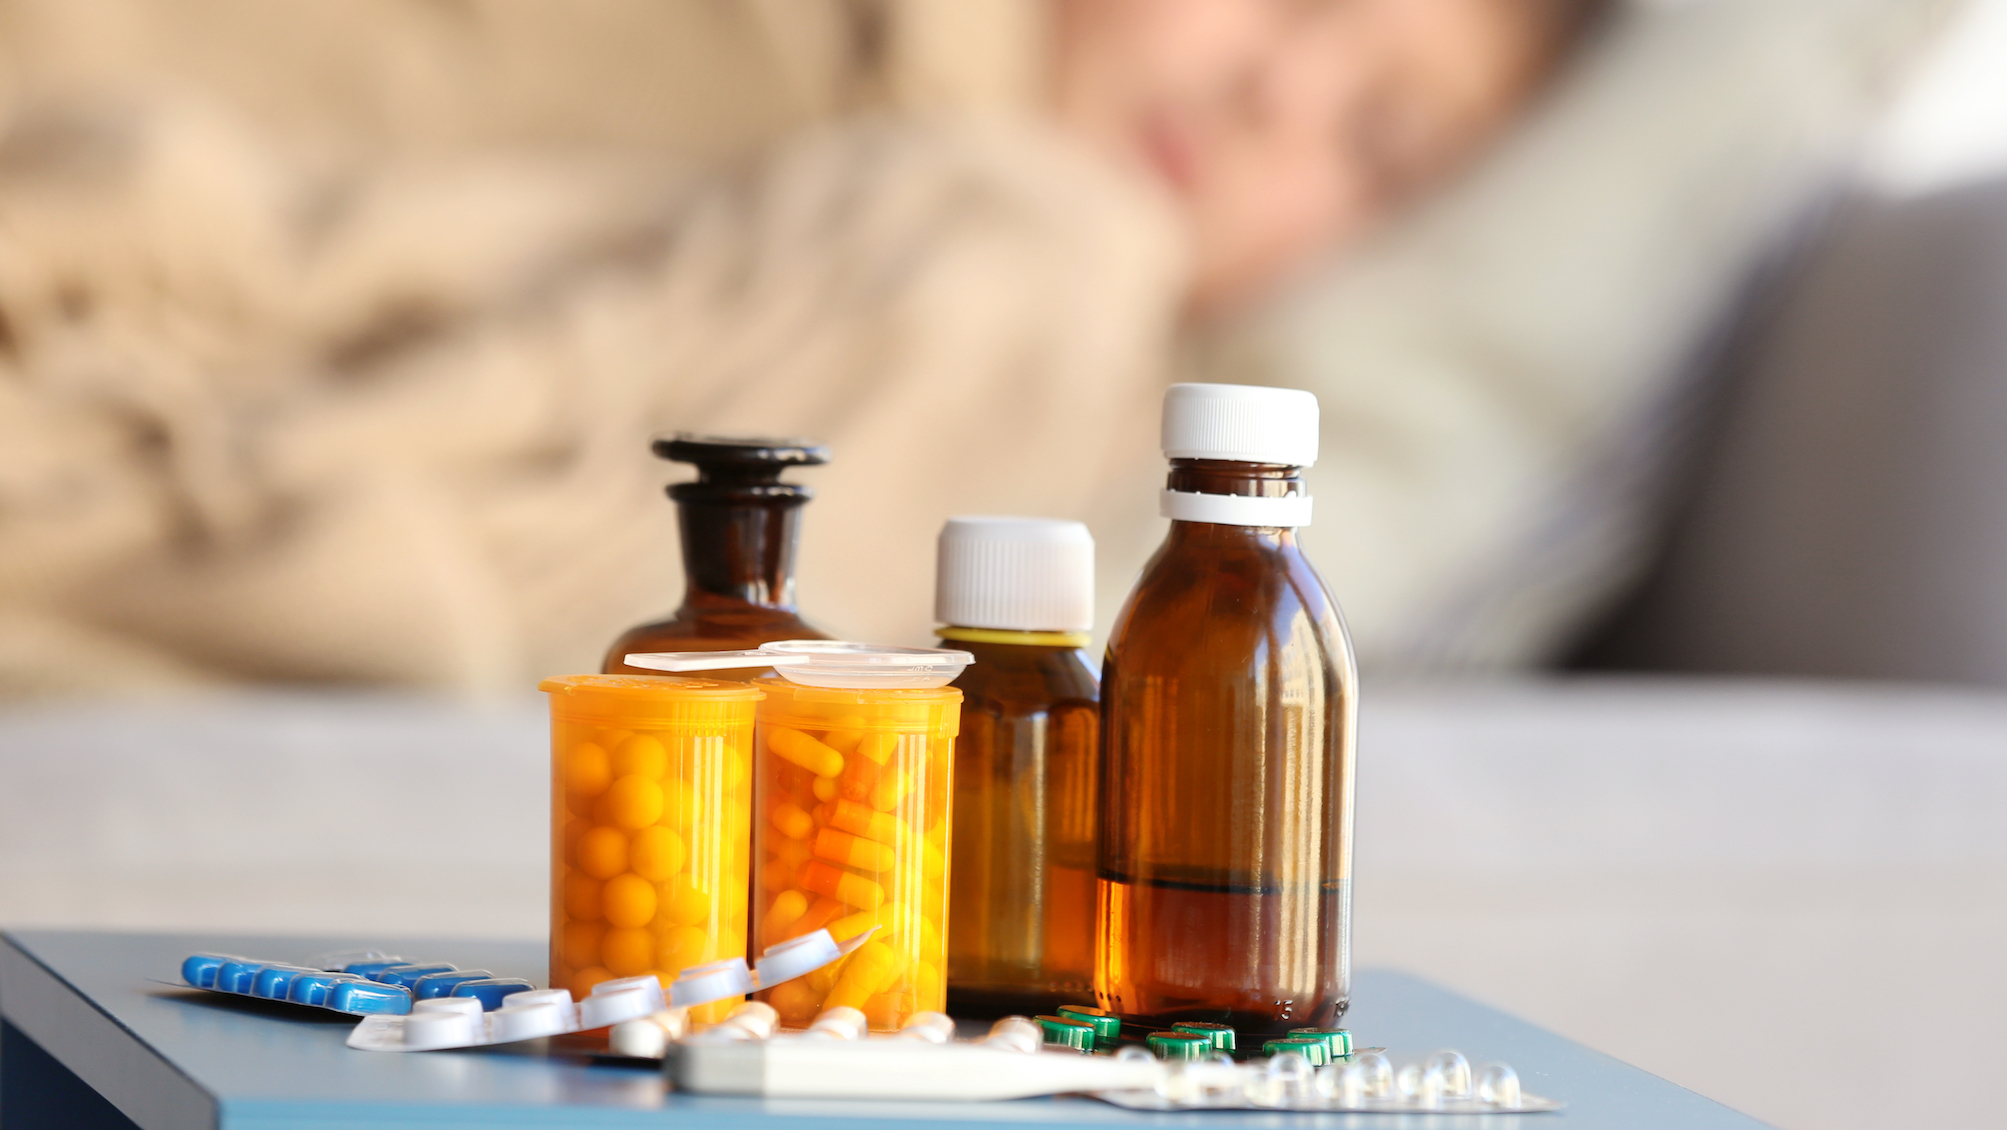 Why adult cold medicine is not good for children